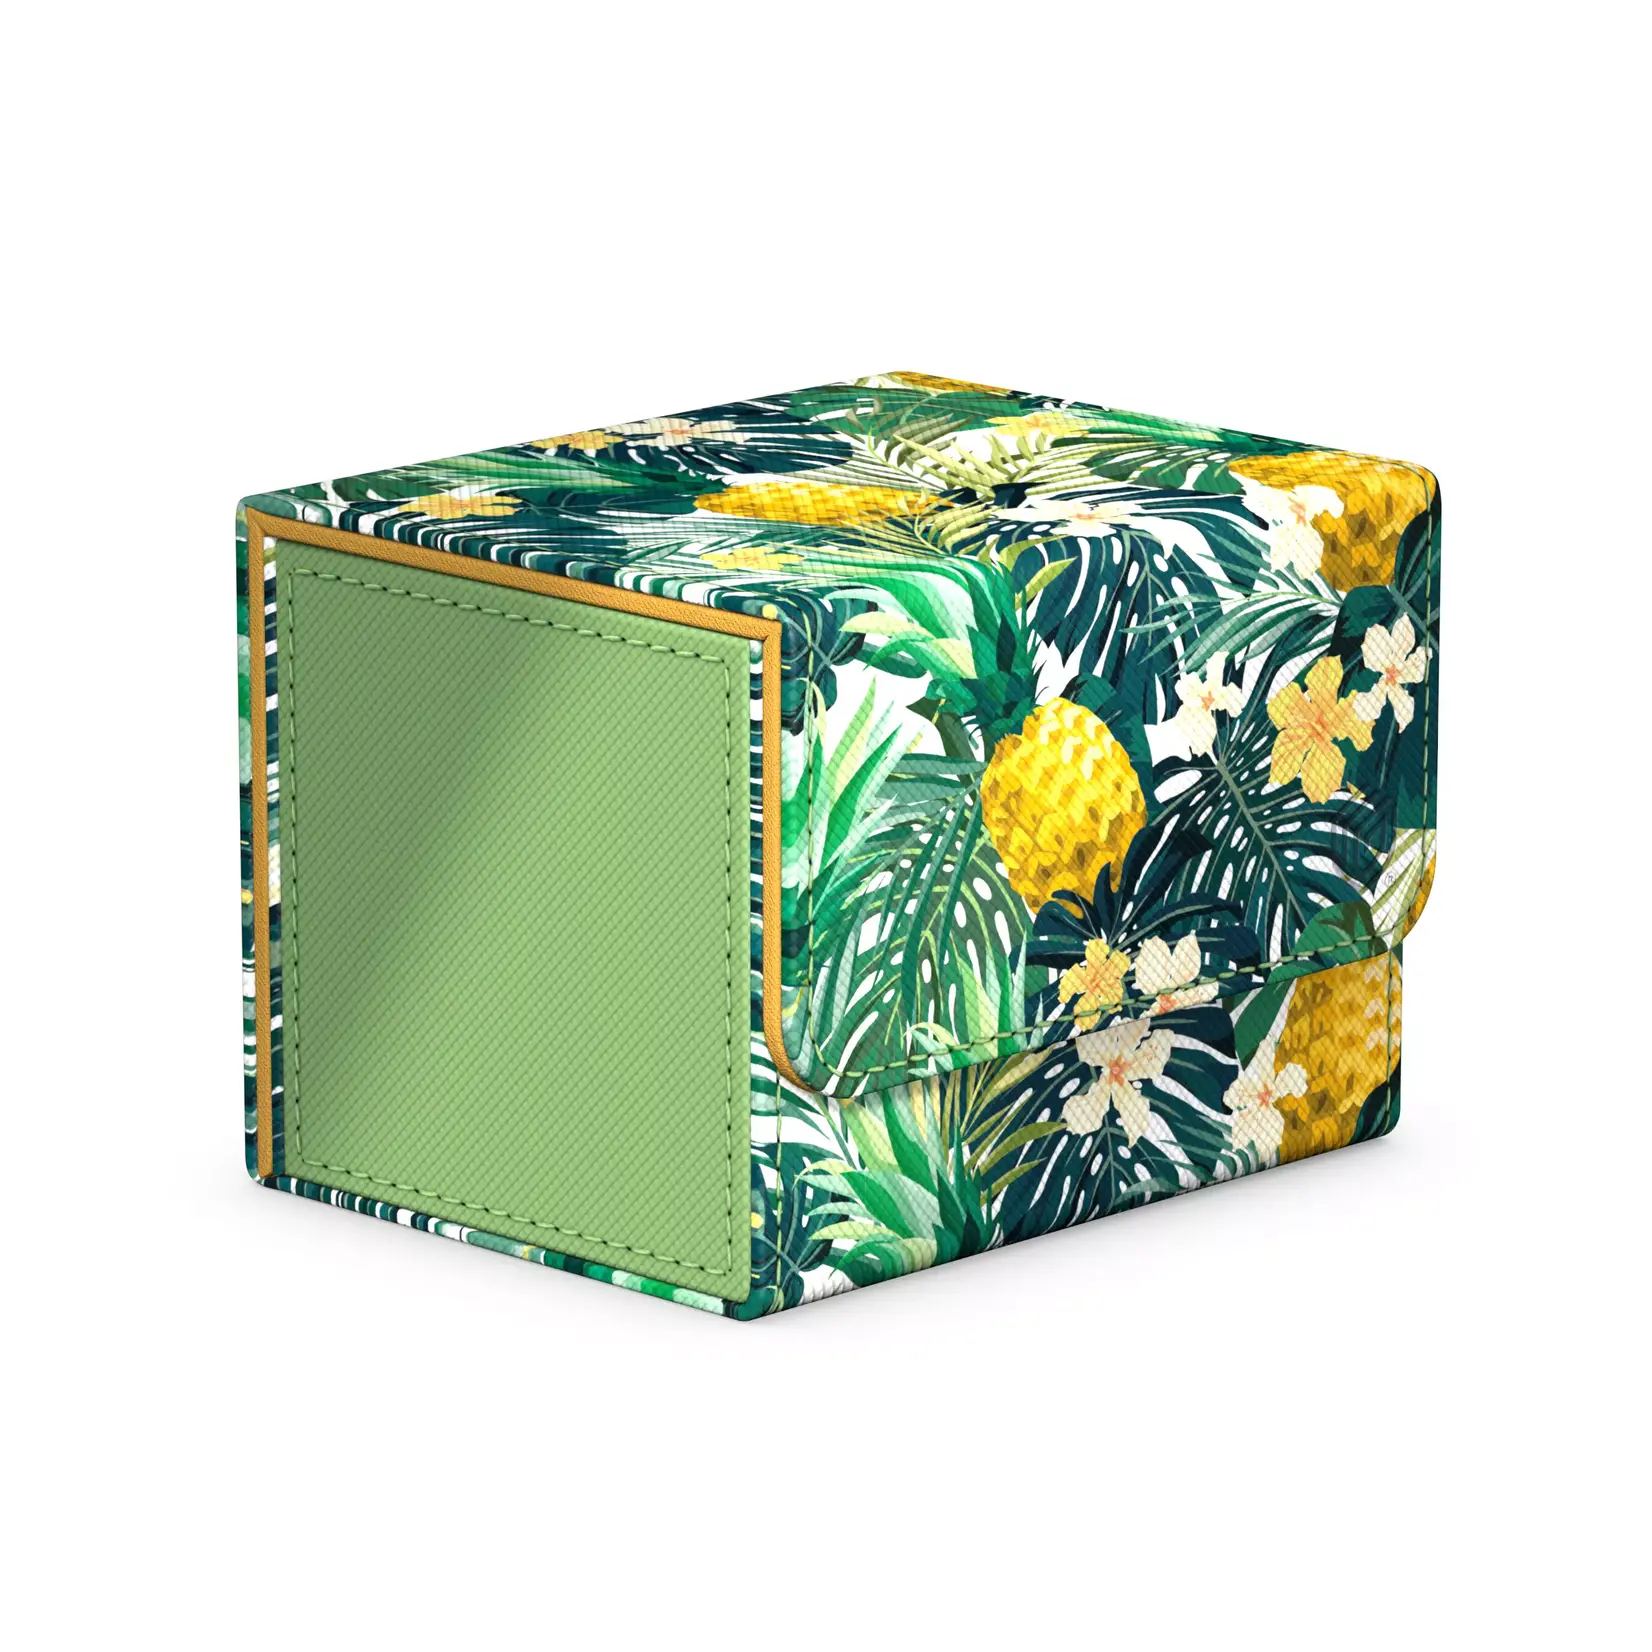 Ultimate Guard Sidewinder 100+ Xenoskin "floral places" - Bahia Green